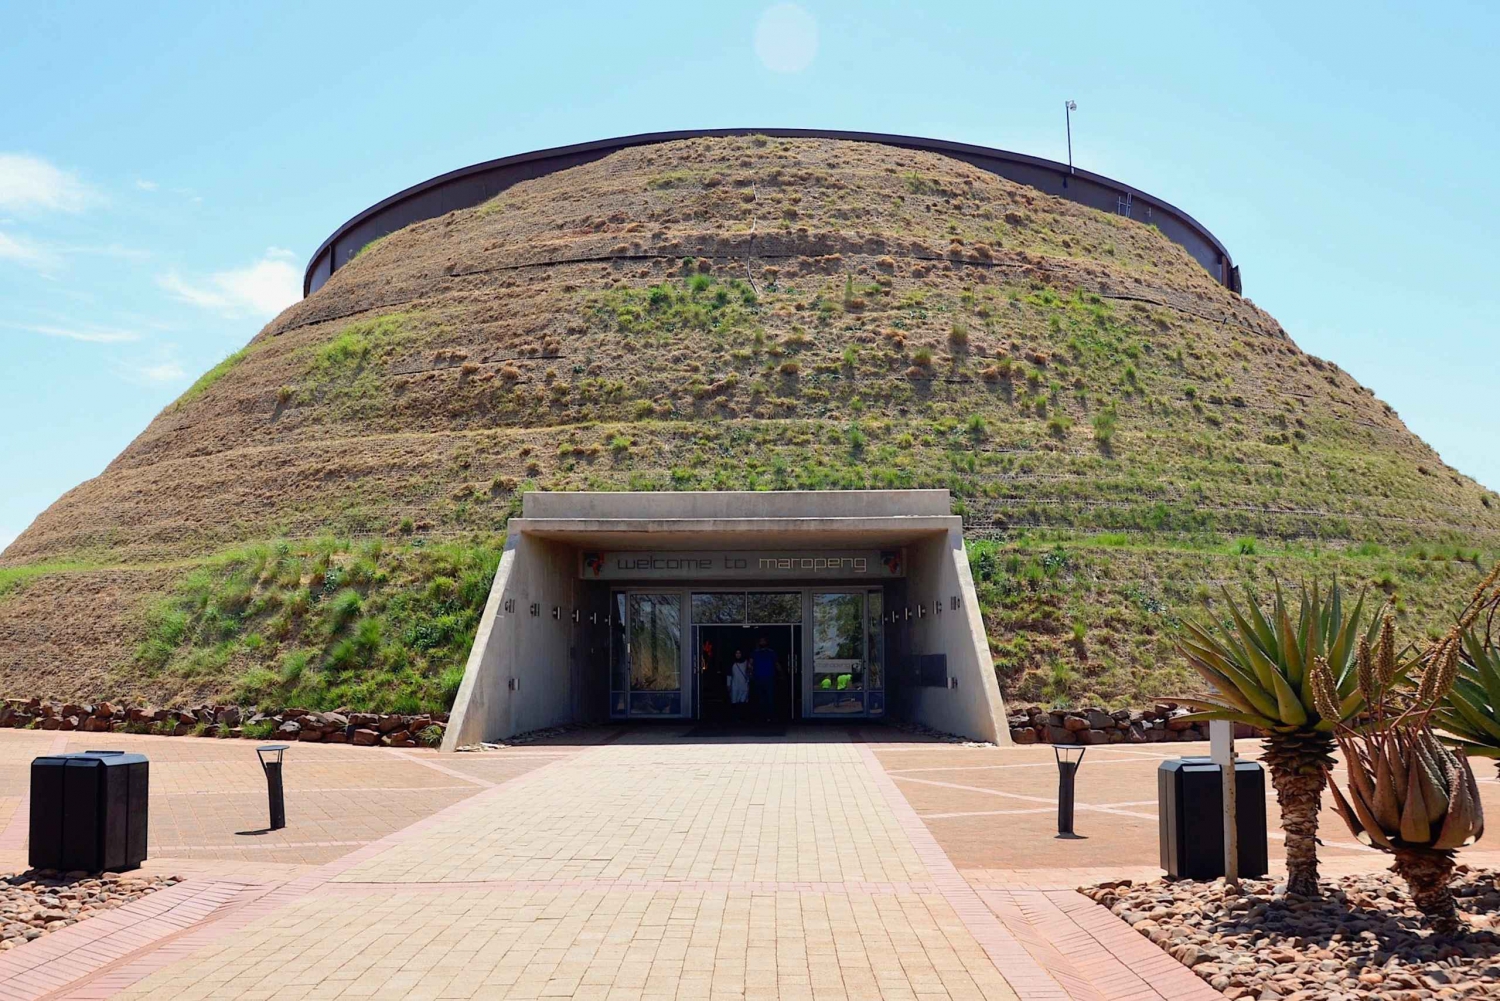 Lesedi Cultural Village and Cradle of Humankind